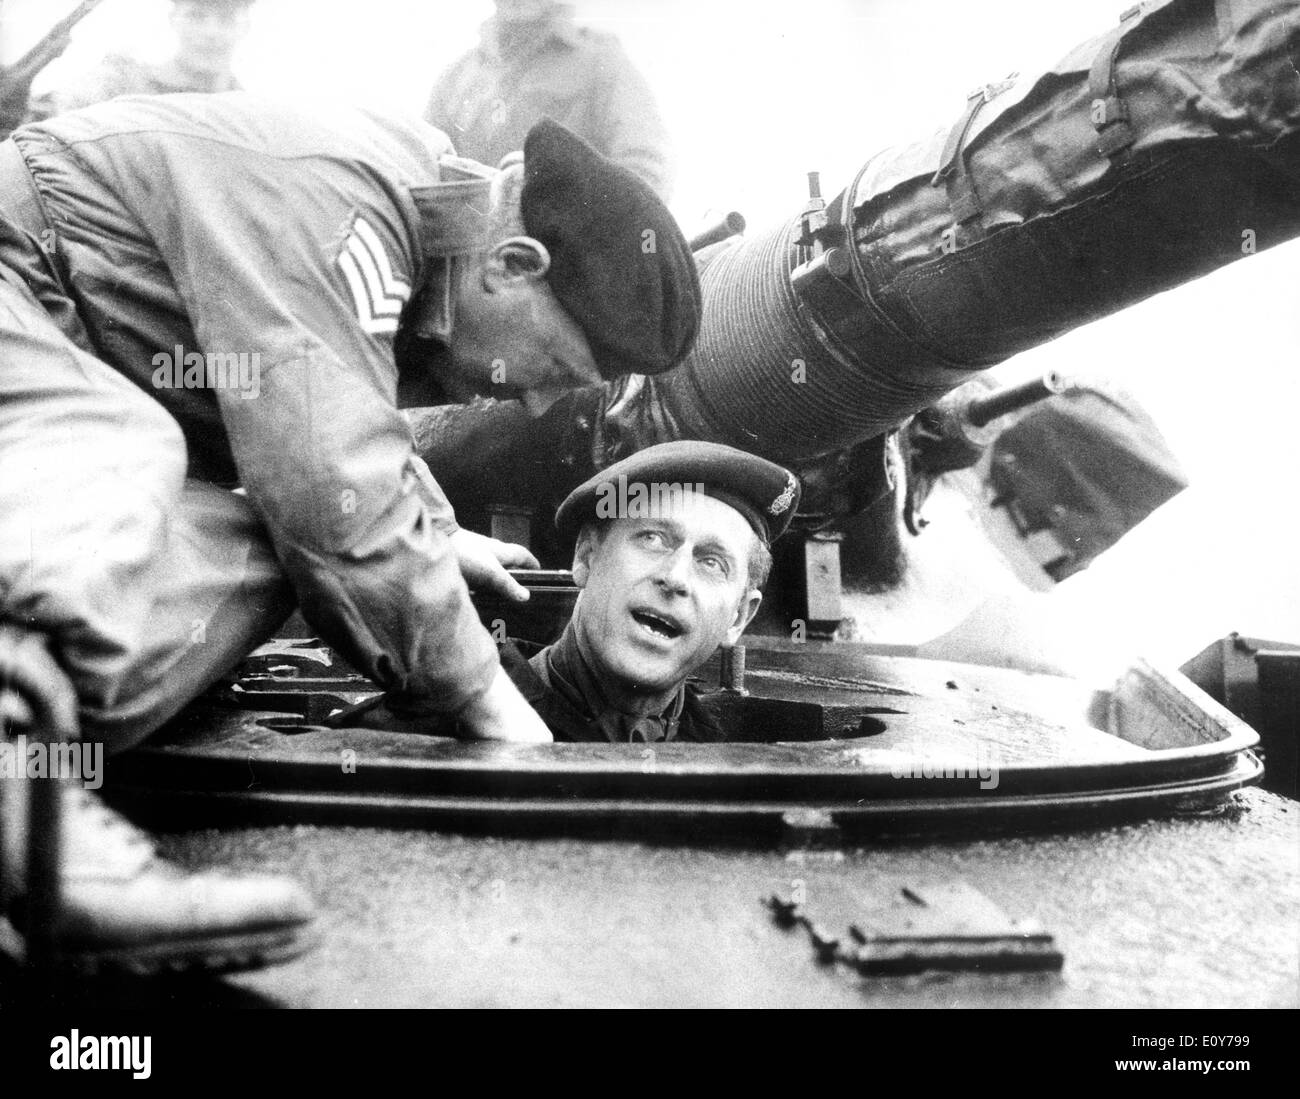 Prince Philip commander of a tank Stock Photo